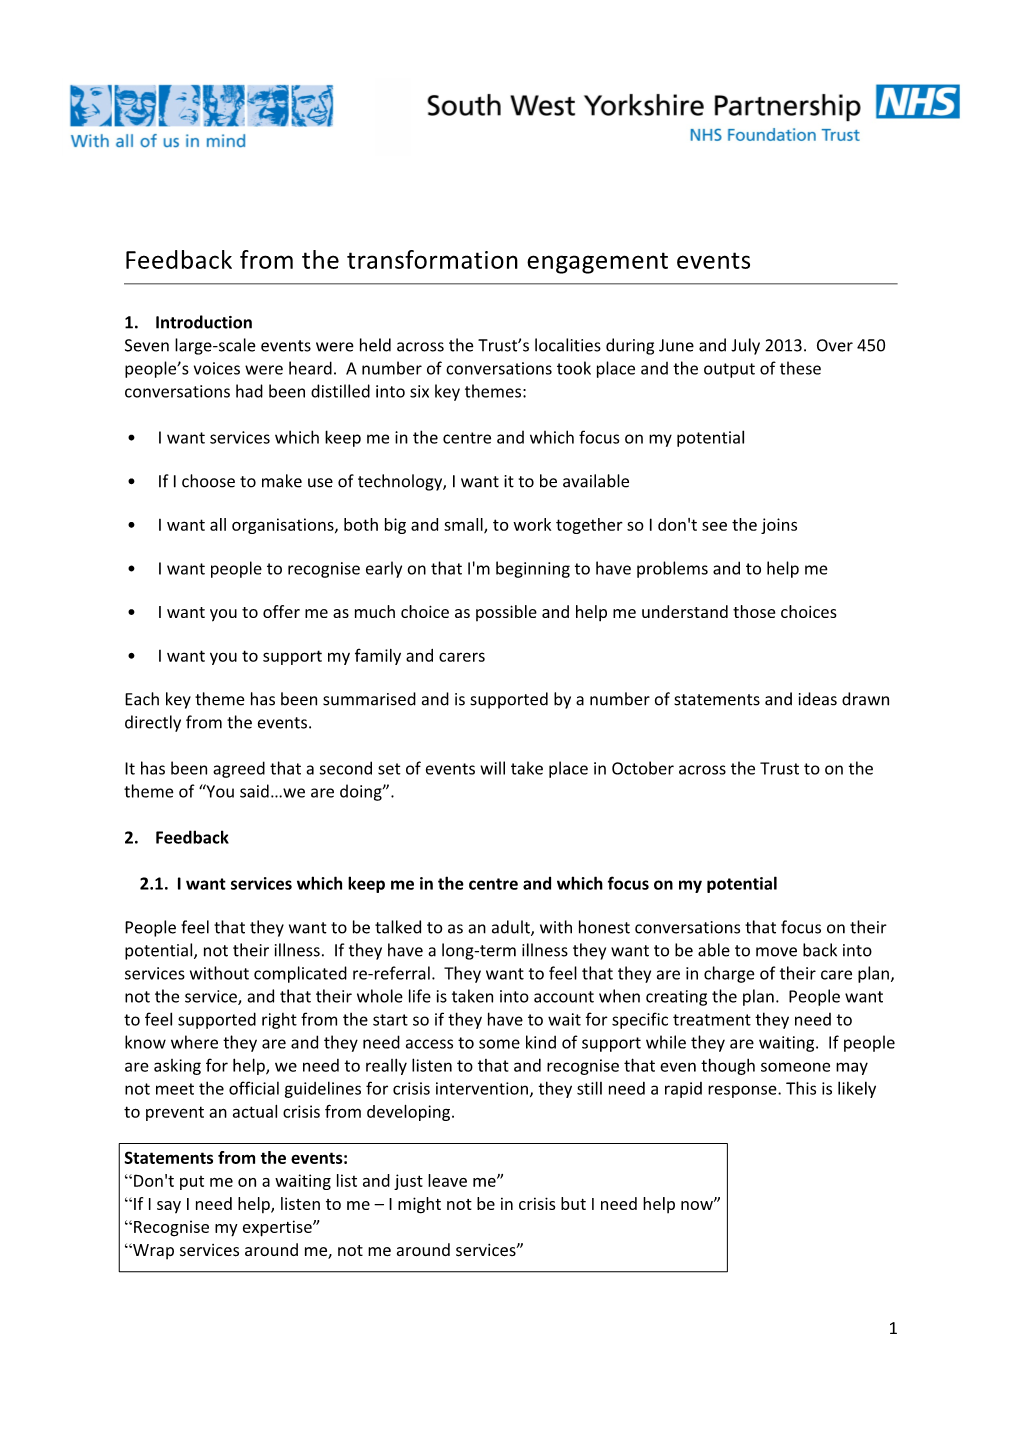 Feedback from the Transformation Engagement Events